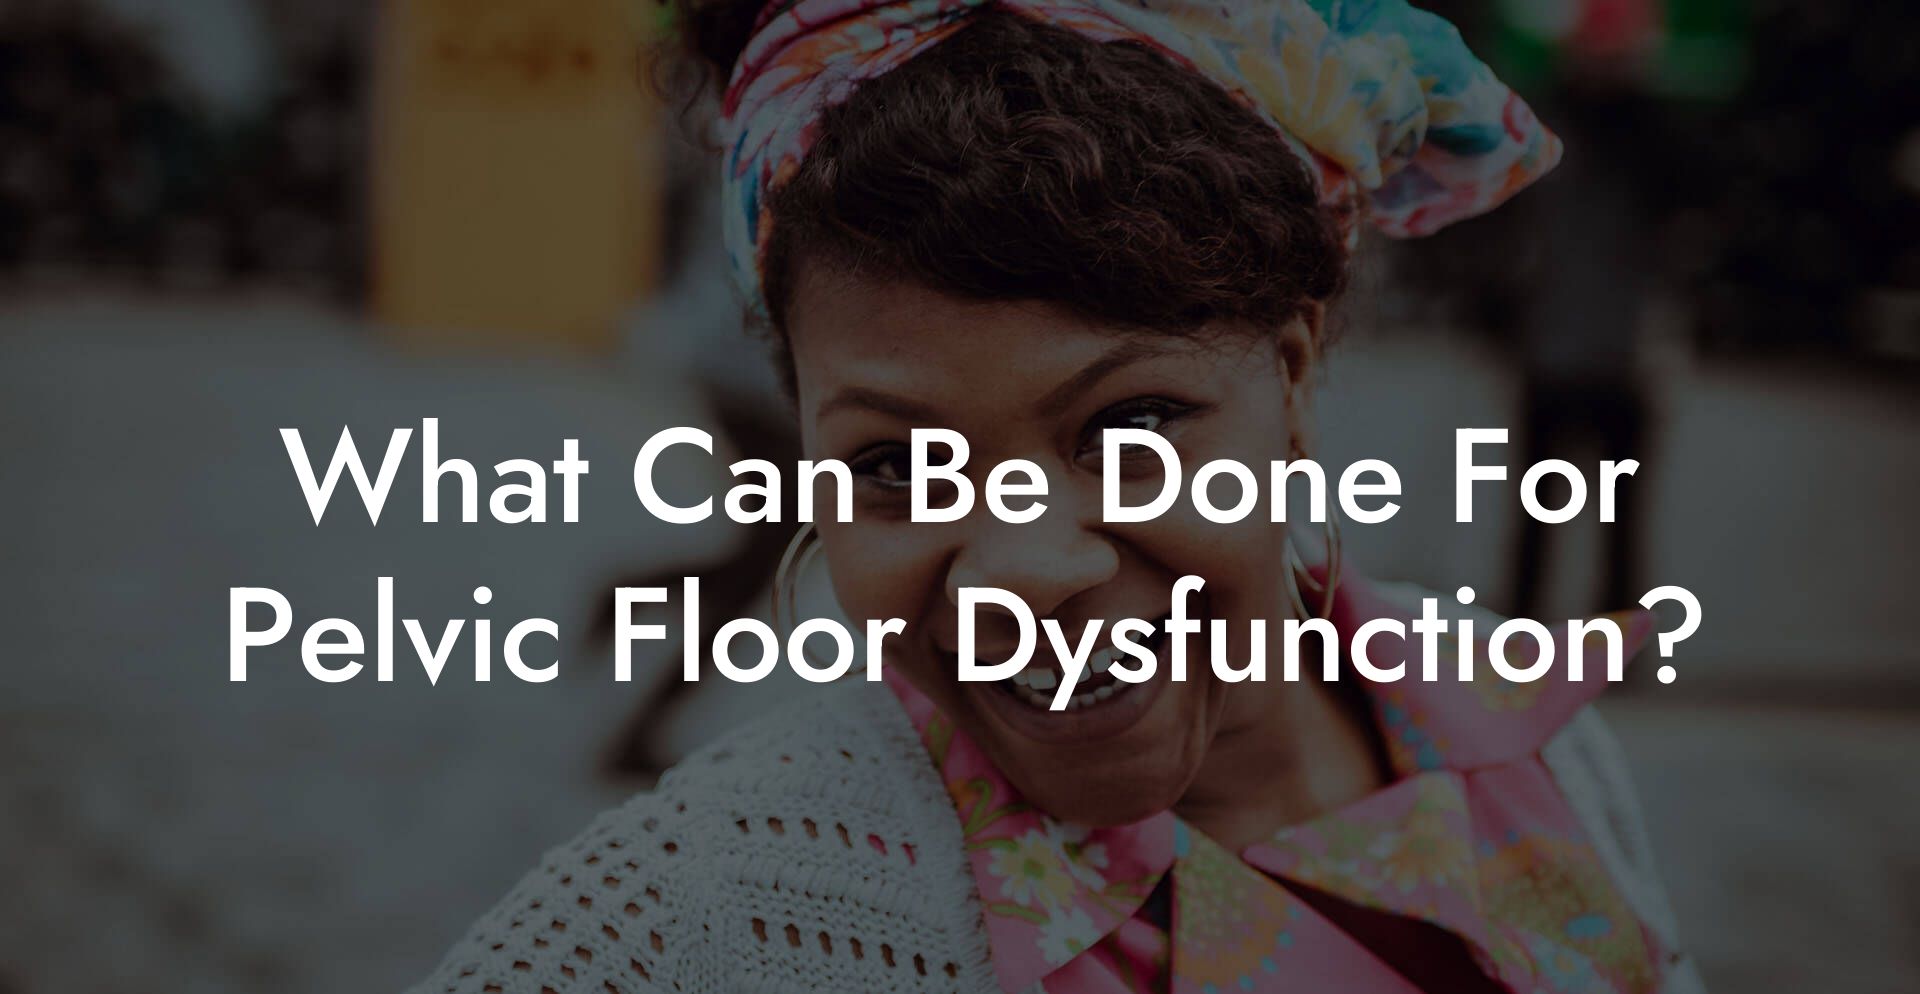 What Can Be Done For Pelvic Floor Dysfunction?